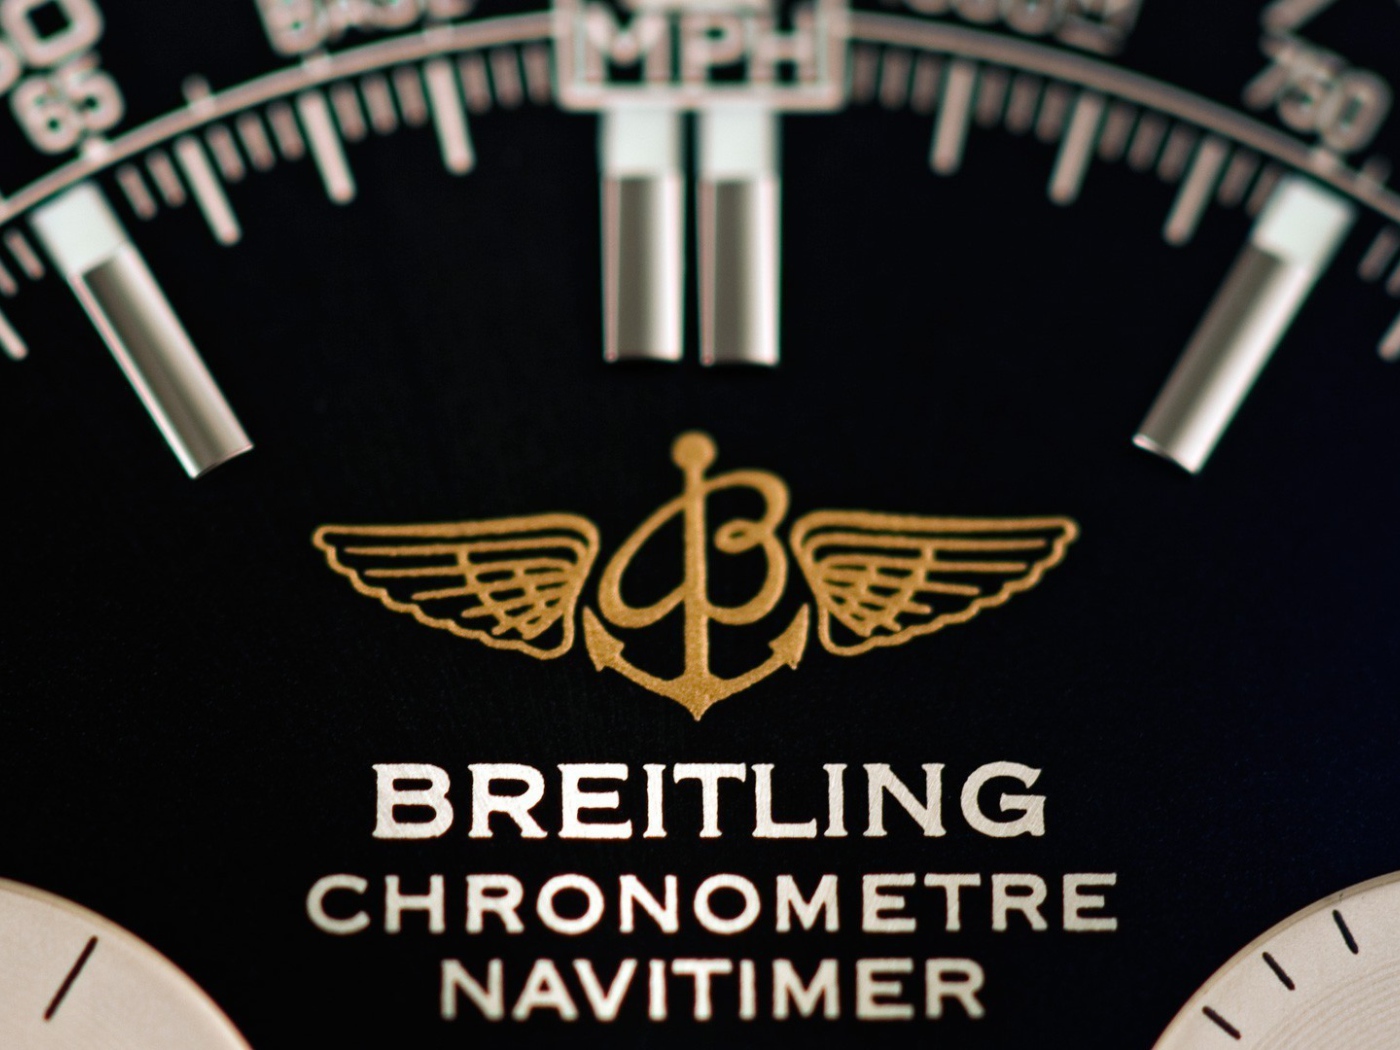 Expensive watches Breitling Brand